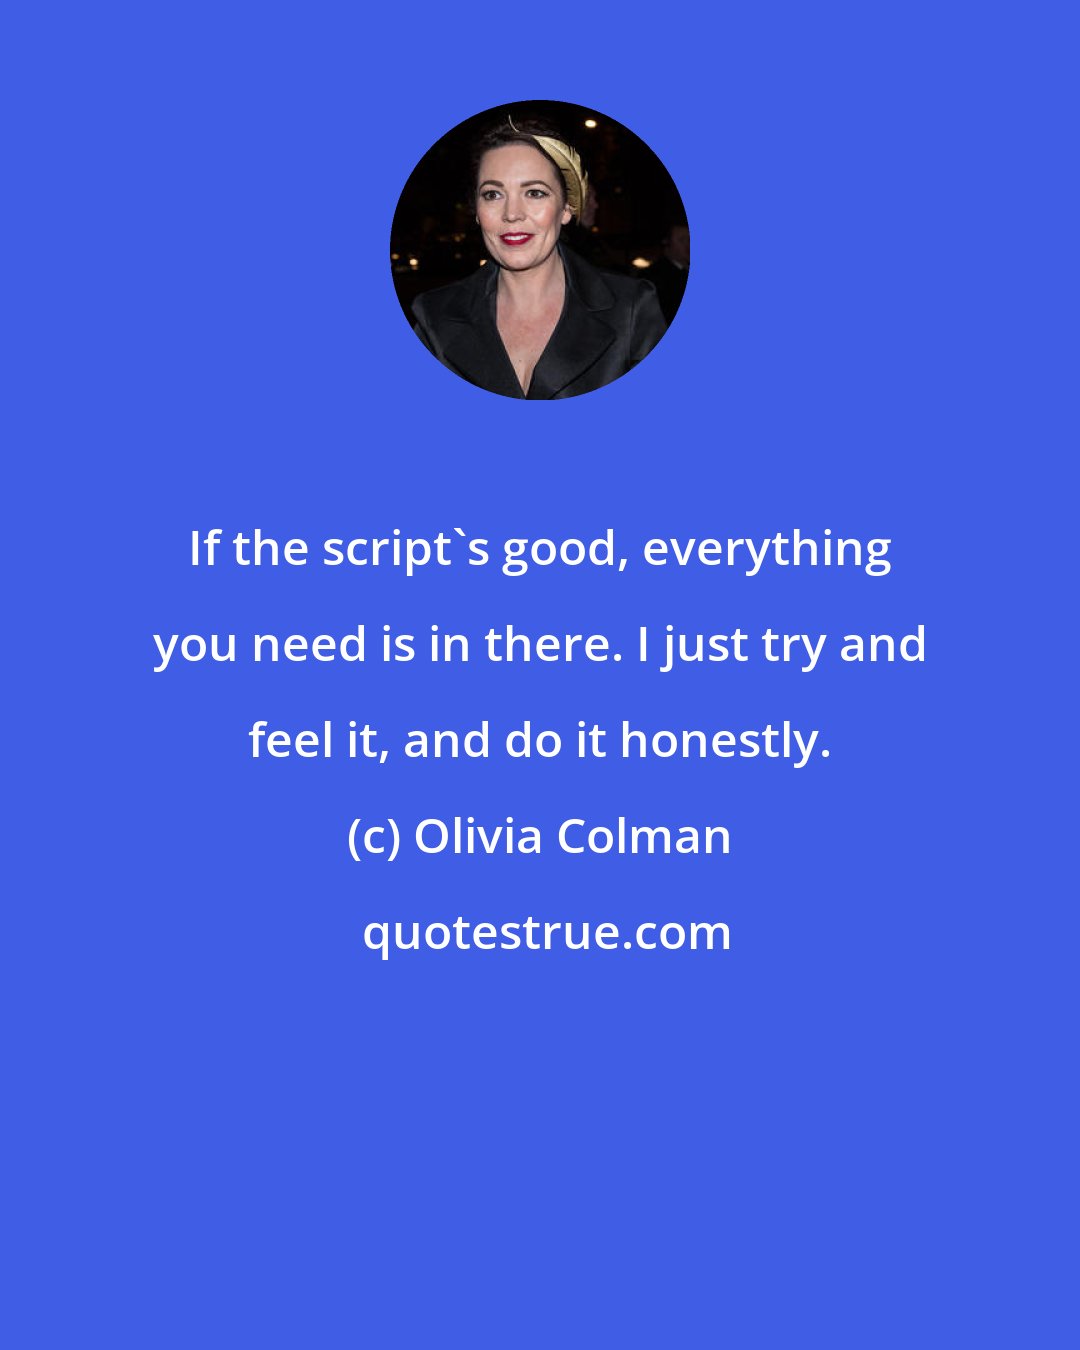 Olivia Colman: If the script's good, everything you need is in there. I just try and feel it, and do it honestly.